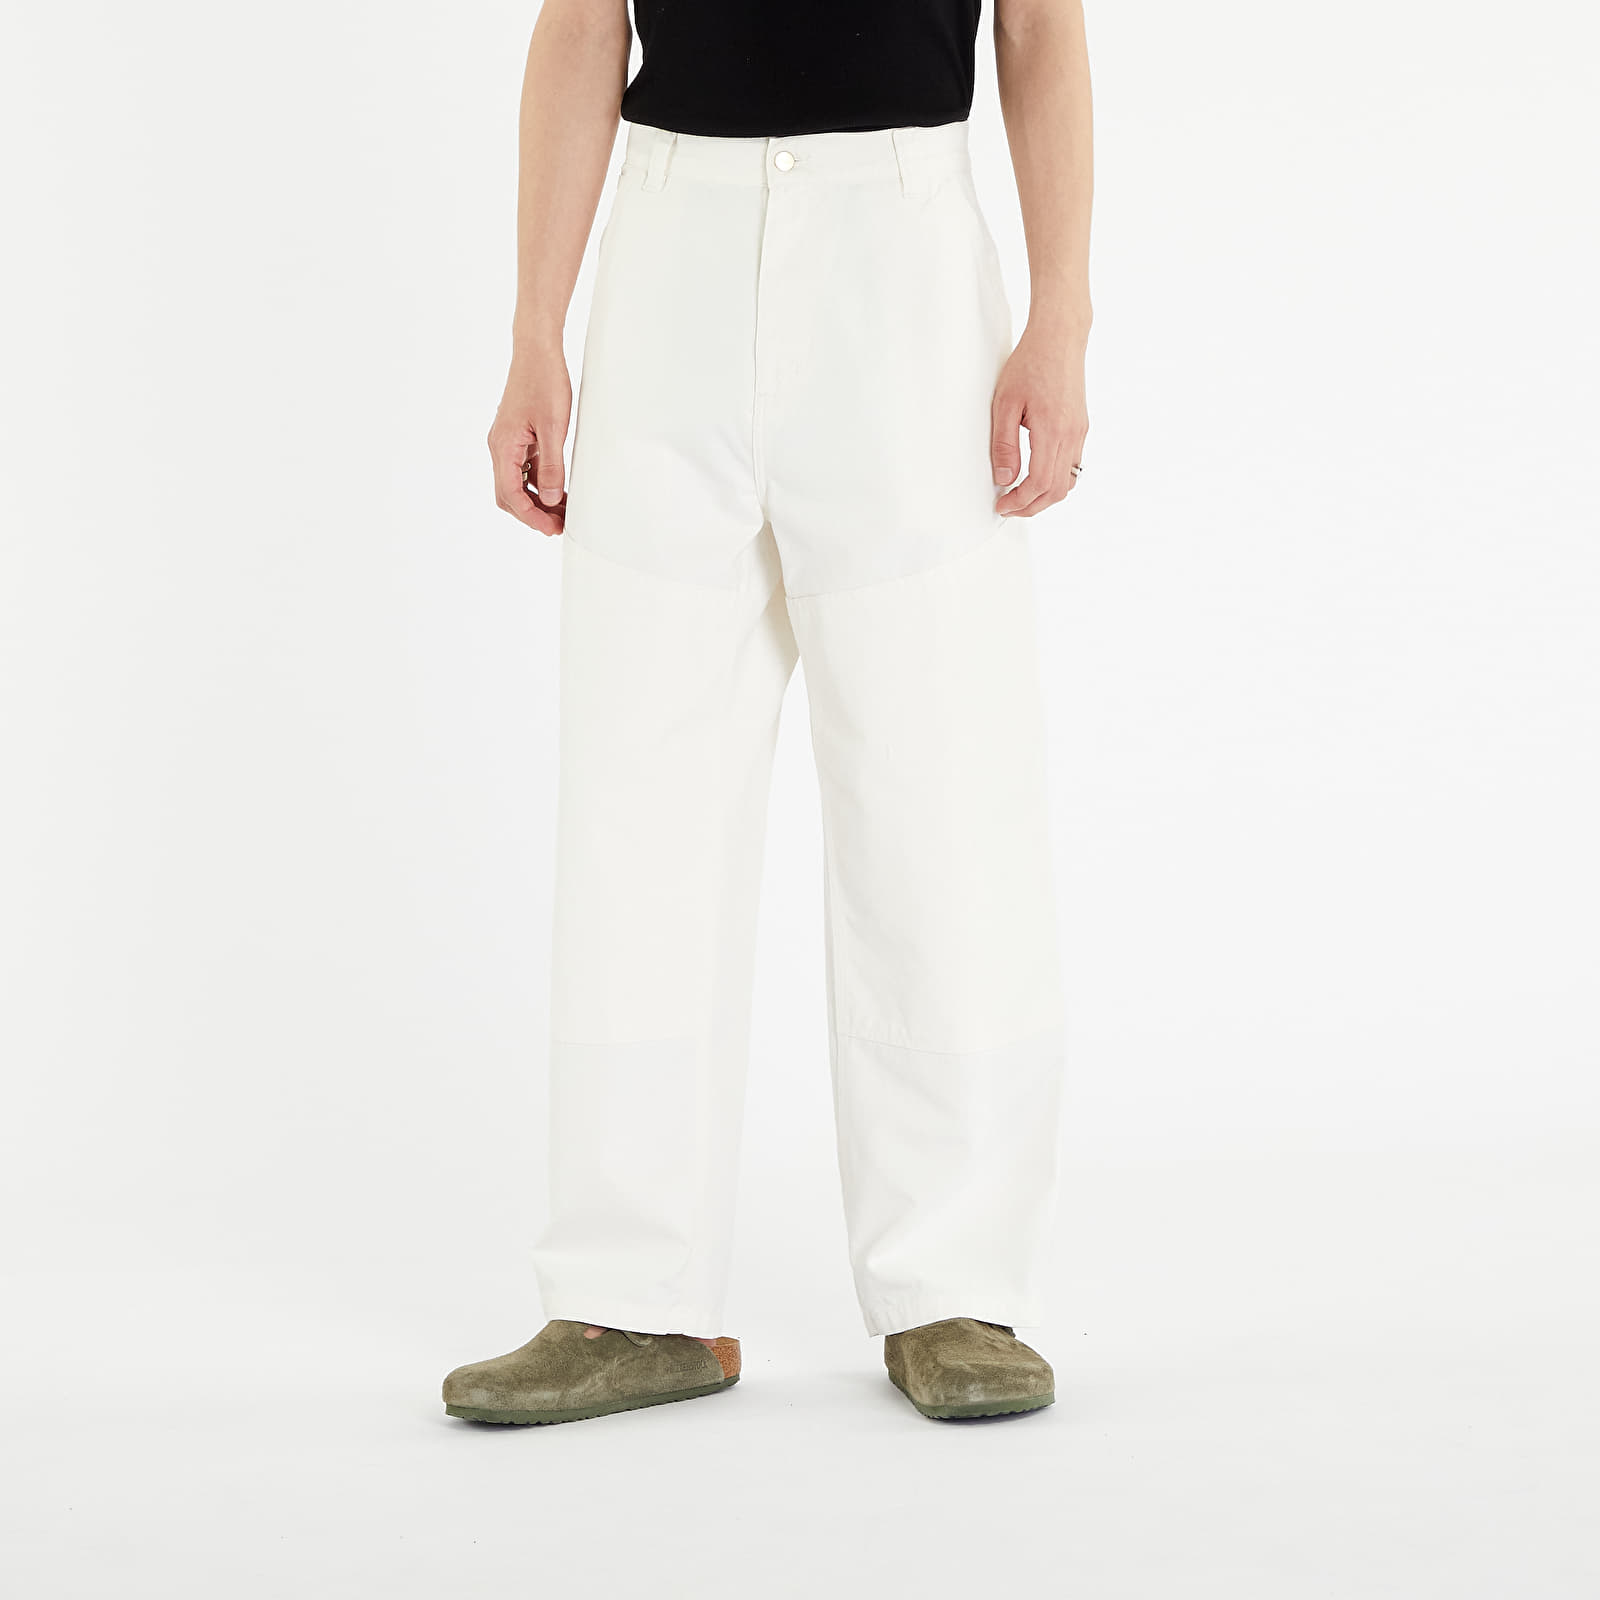 Pants and jeans Carhartt WIP Wide Panel Pant UNISEX Wax Rinsed